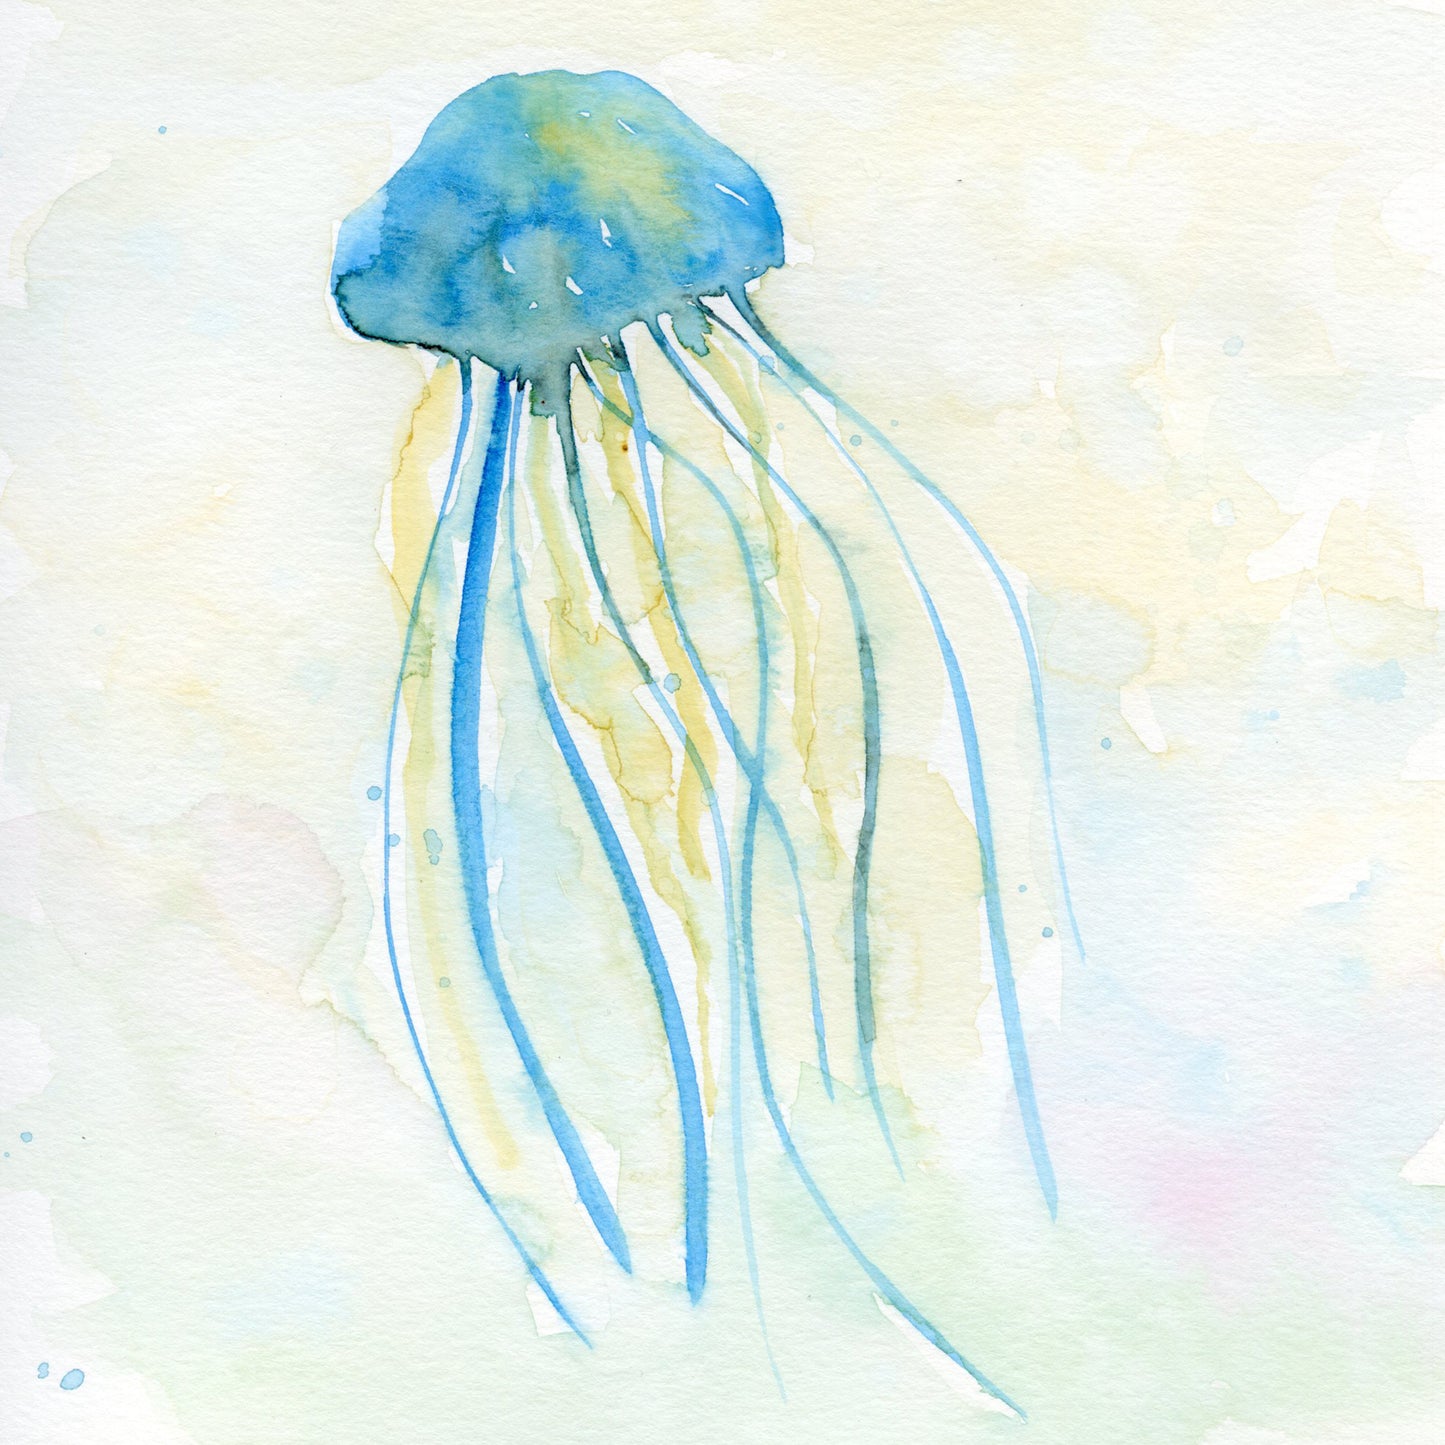 Jellyfish Watercolor Print on Wood Block - Flamingo Shores - Original Art for Home Decor and Gifts